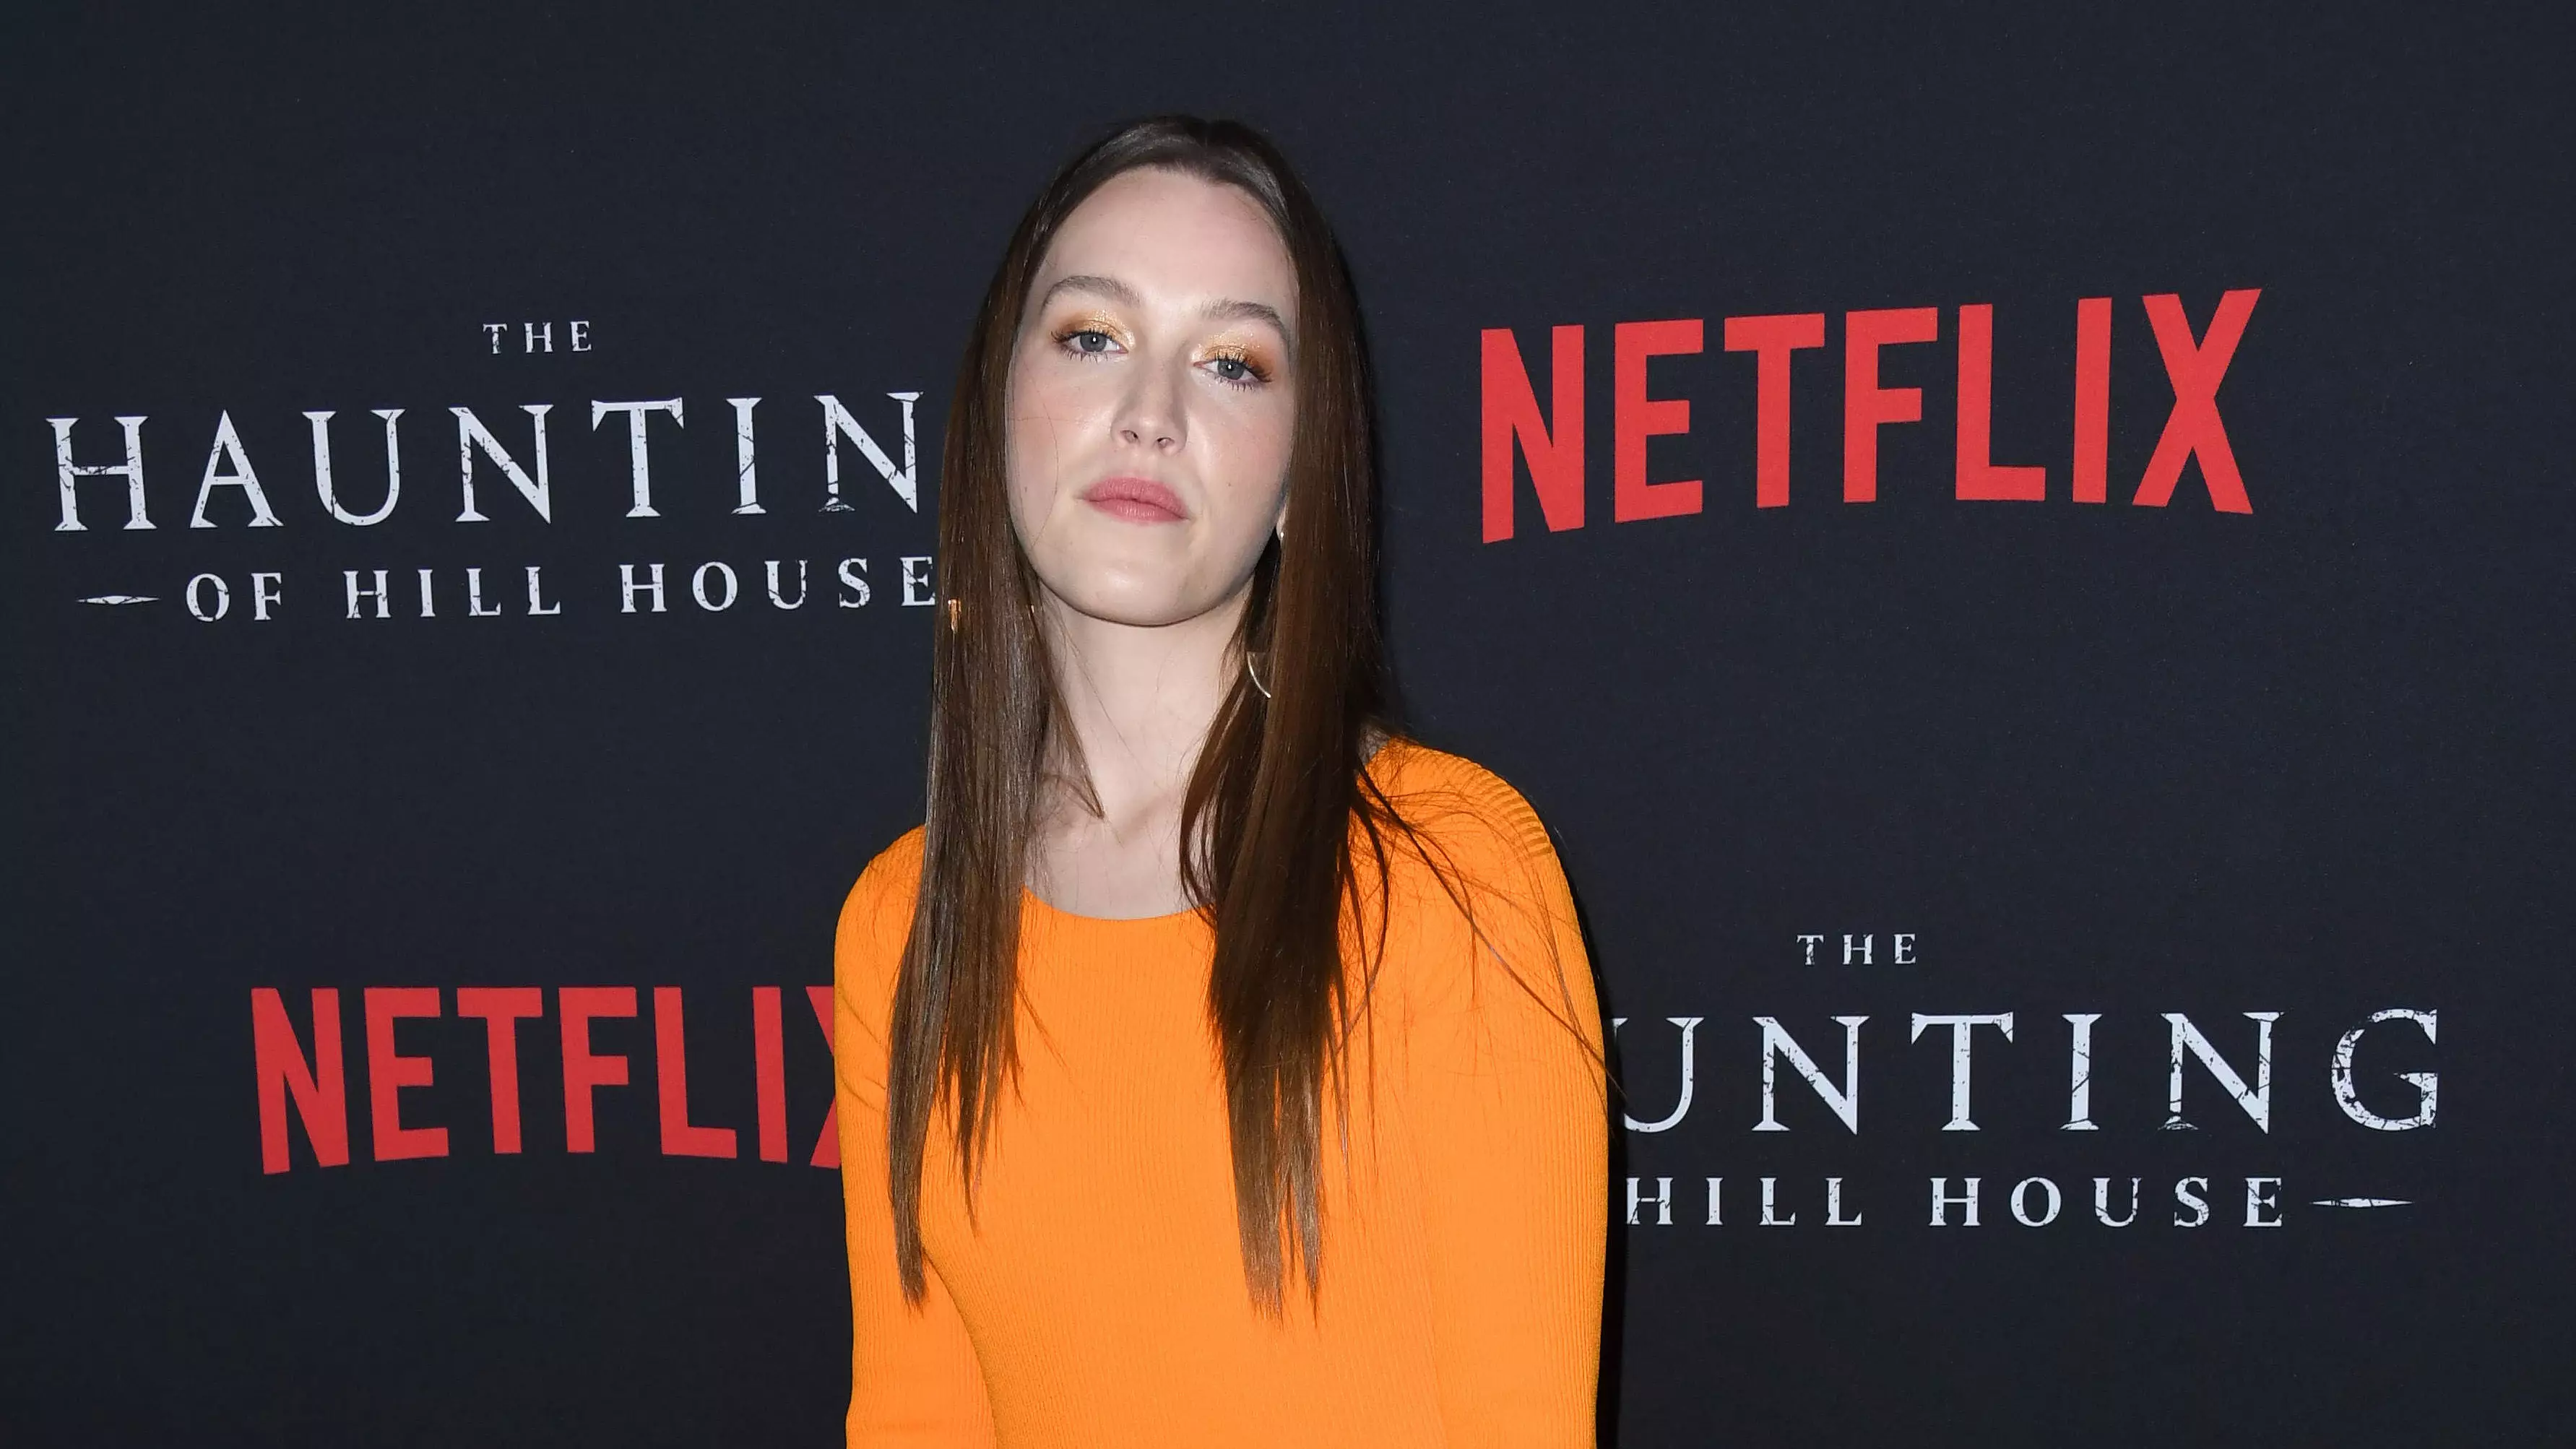 Haunting Of Hill House Star Victoria Pedretti Announced As Love Interest In You Season 2